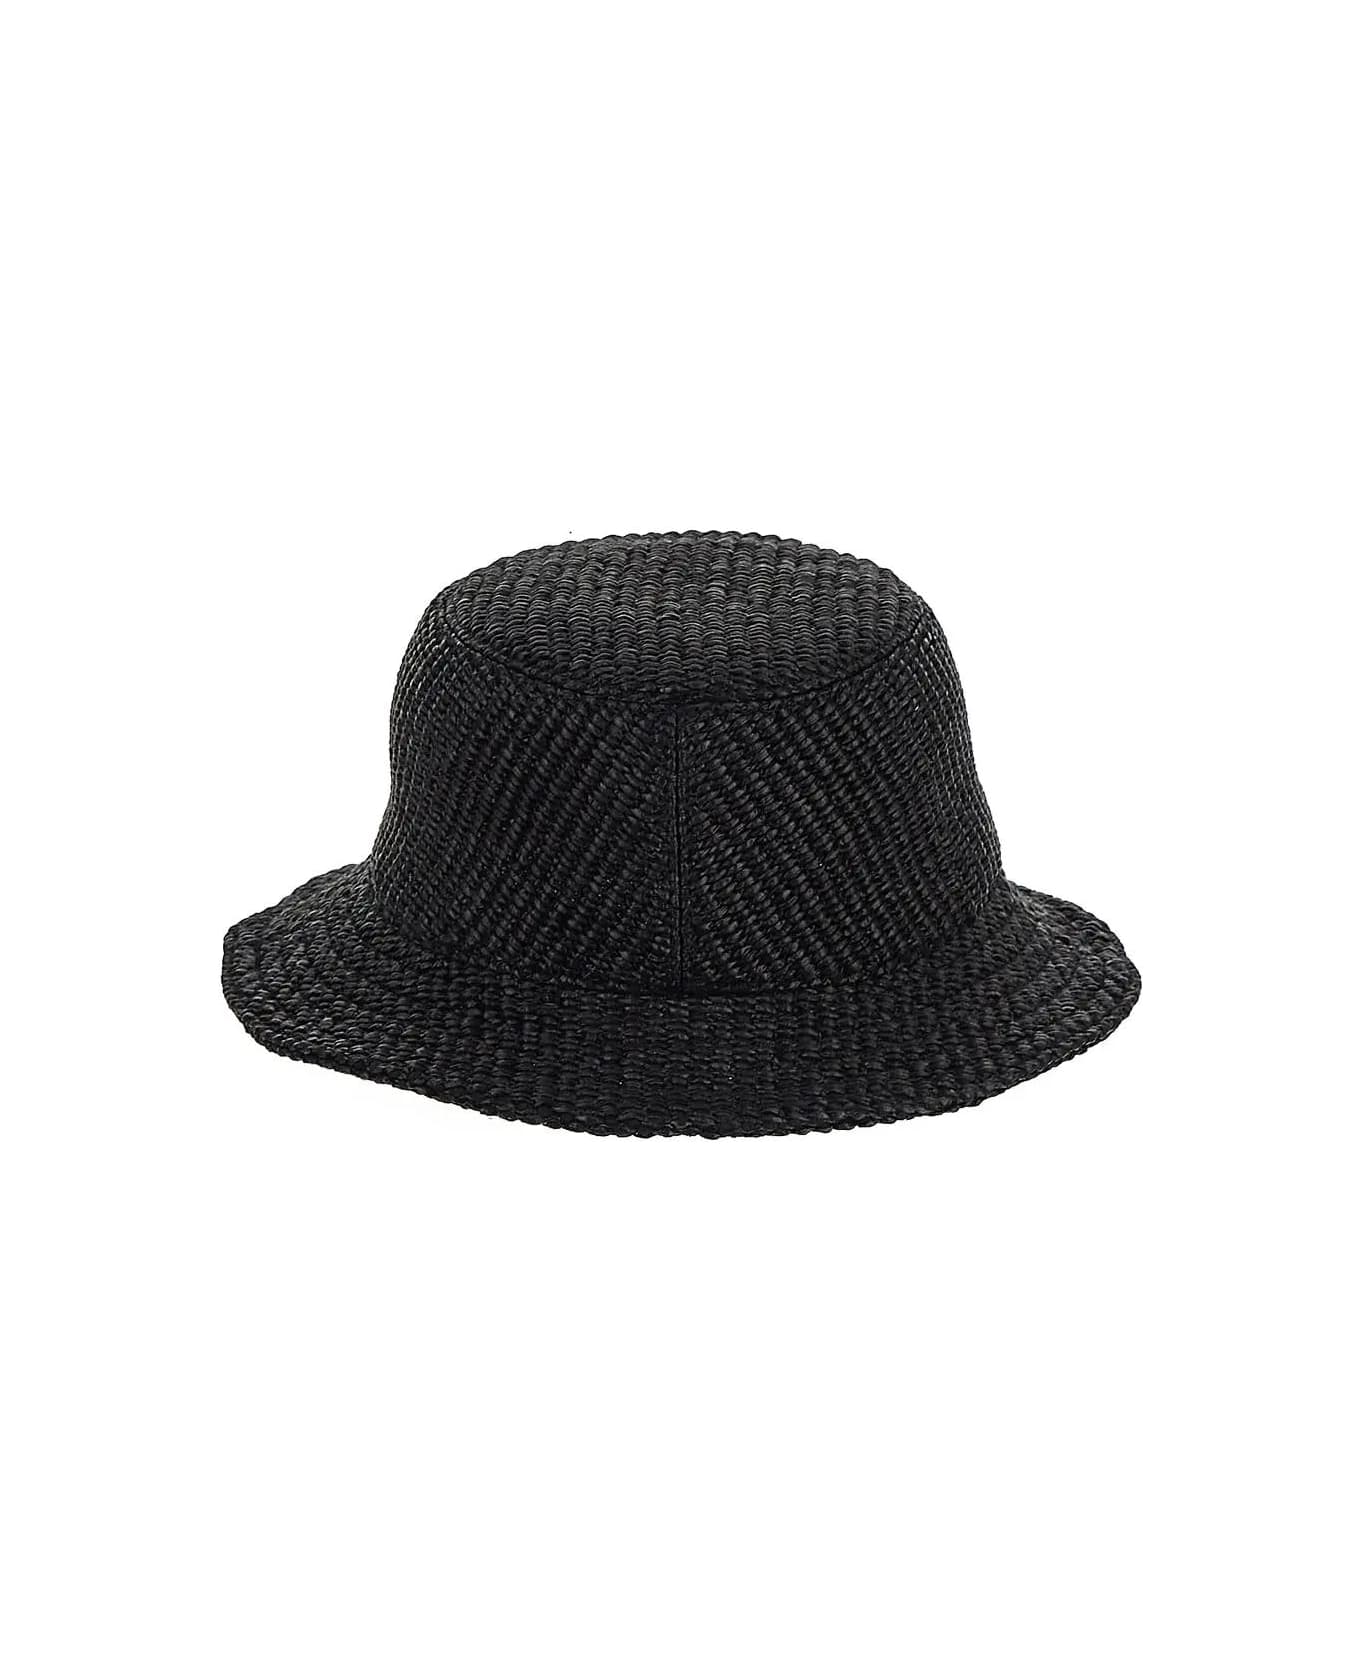 Givenchy Reversible Bucket Hat - Black